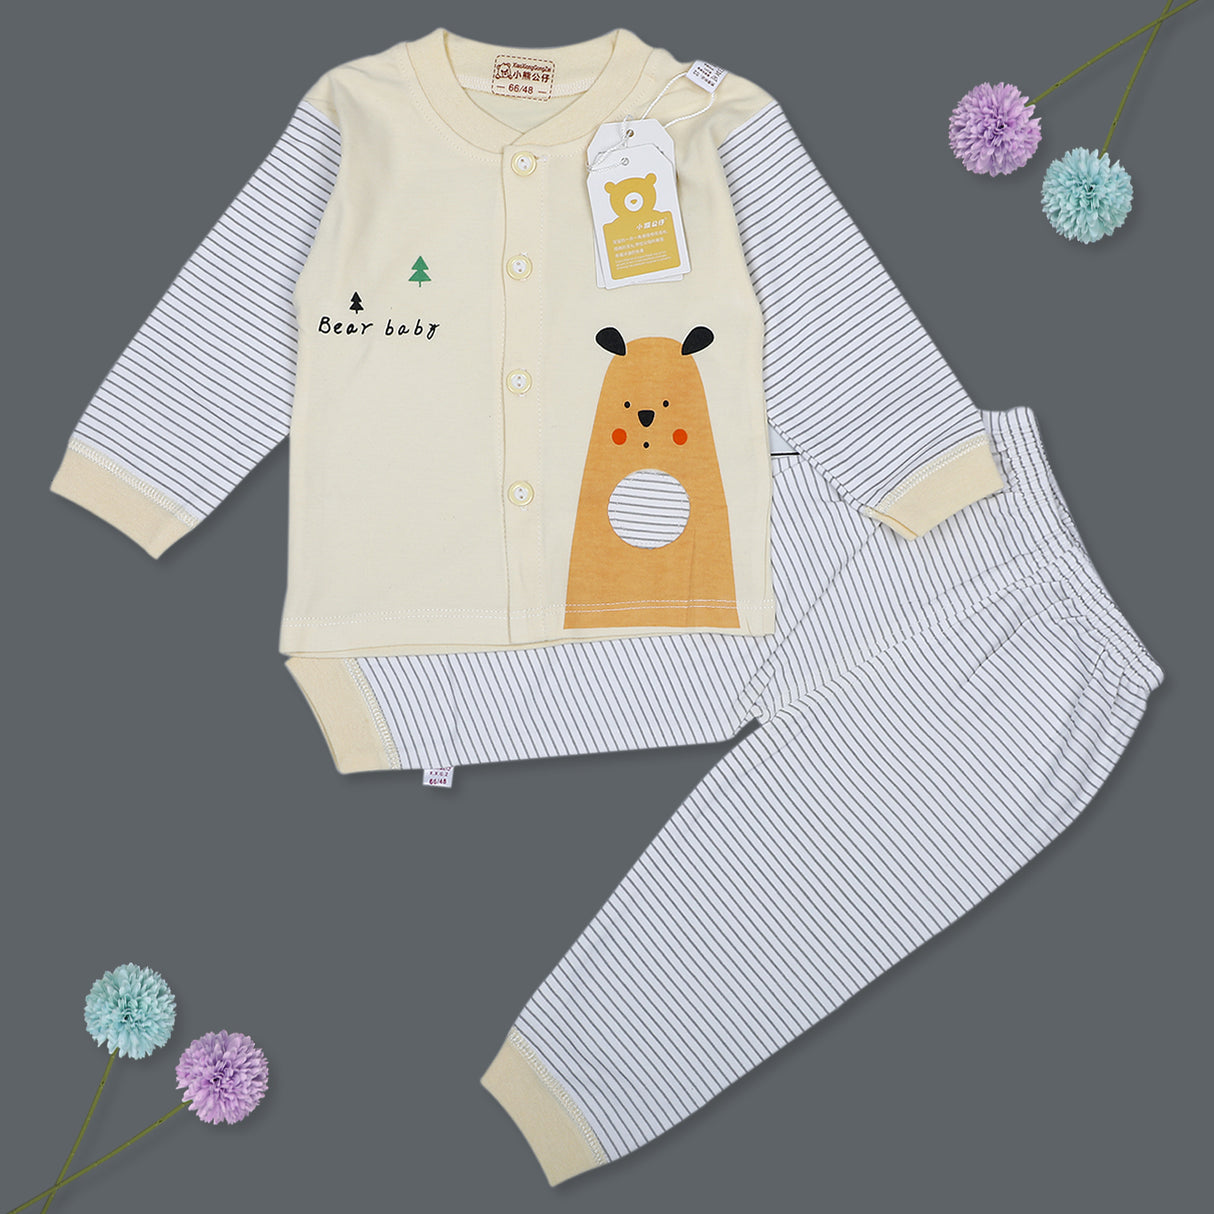 Bear Baby Full Sleeves Top And Pyjama Buttoned Night Suit